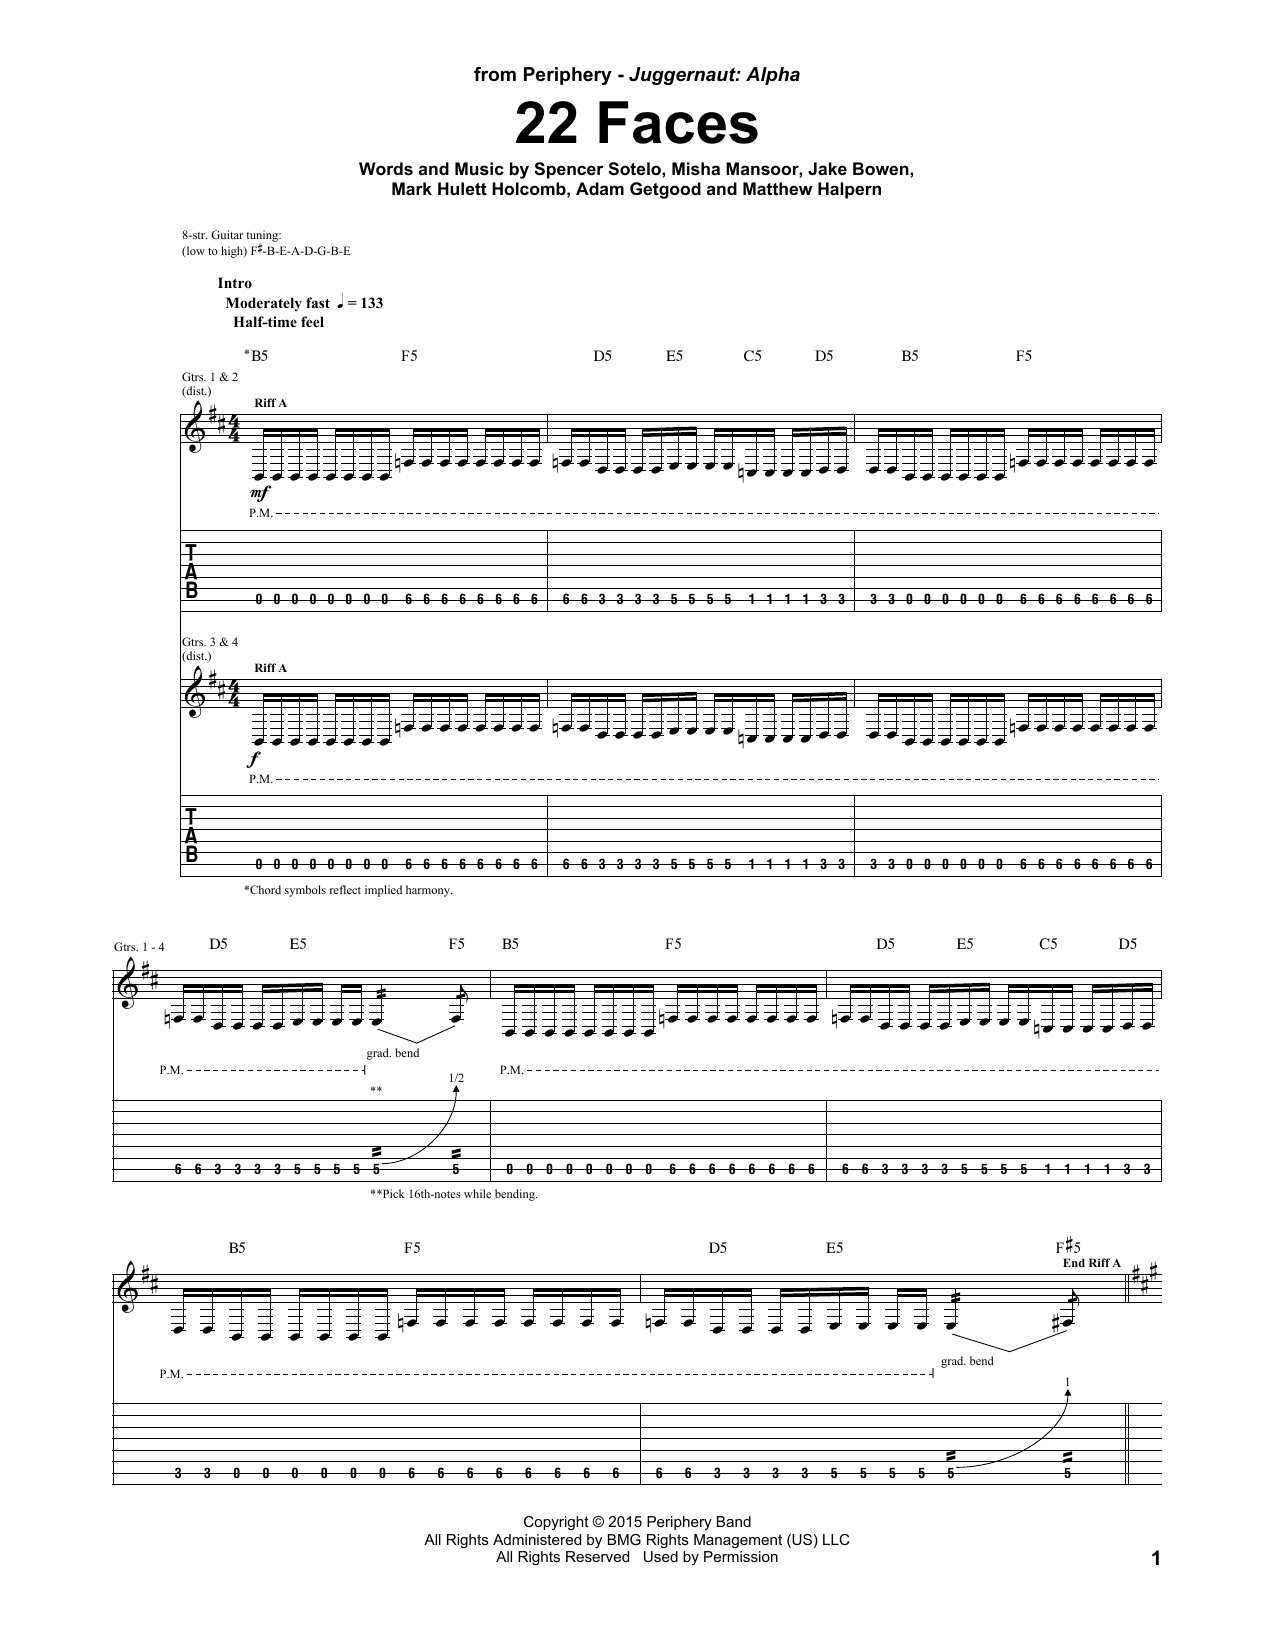 Download Periphery 22 Faces Sheet Music